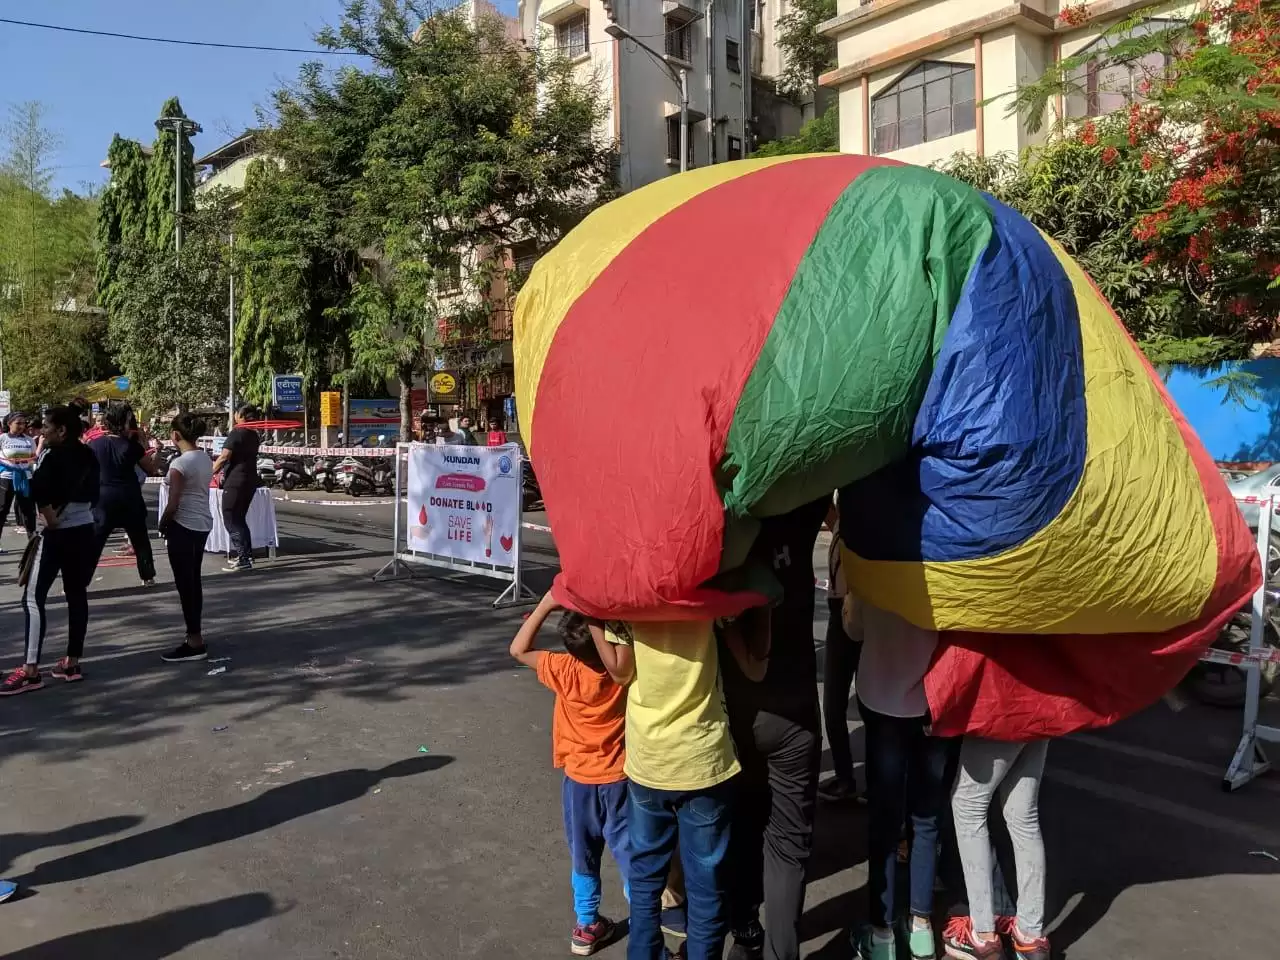 Children indulged in playing with their parents at Pune Street Fest